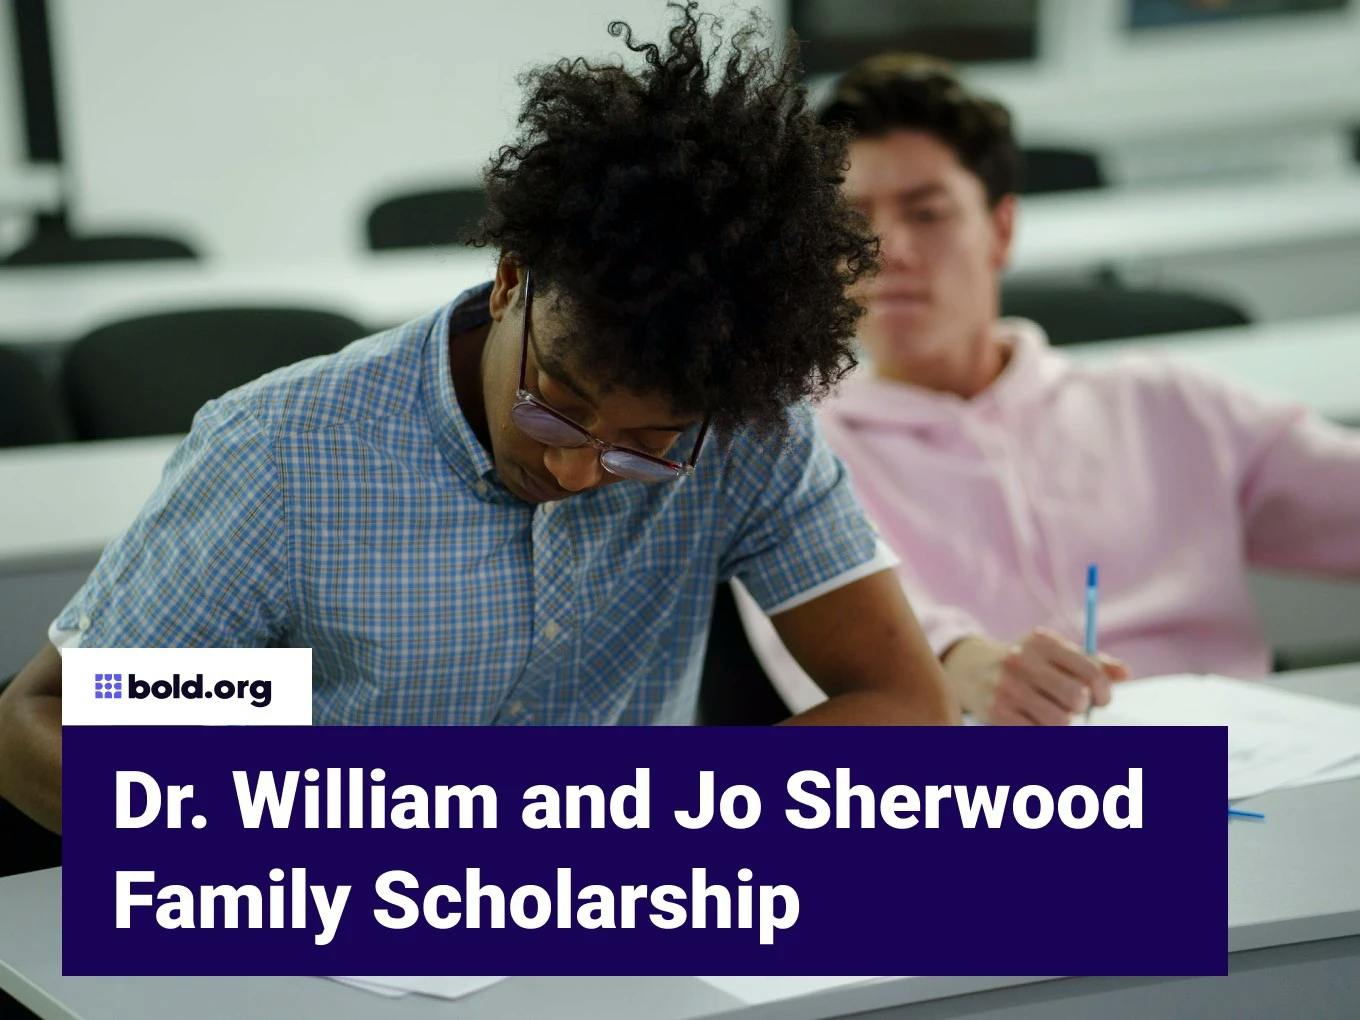 Dr. William and Jo Sherwood Family Scholarship